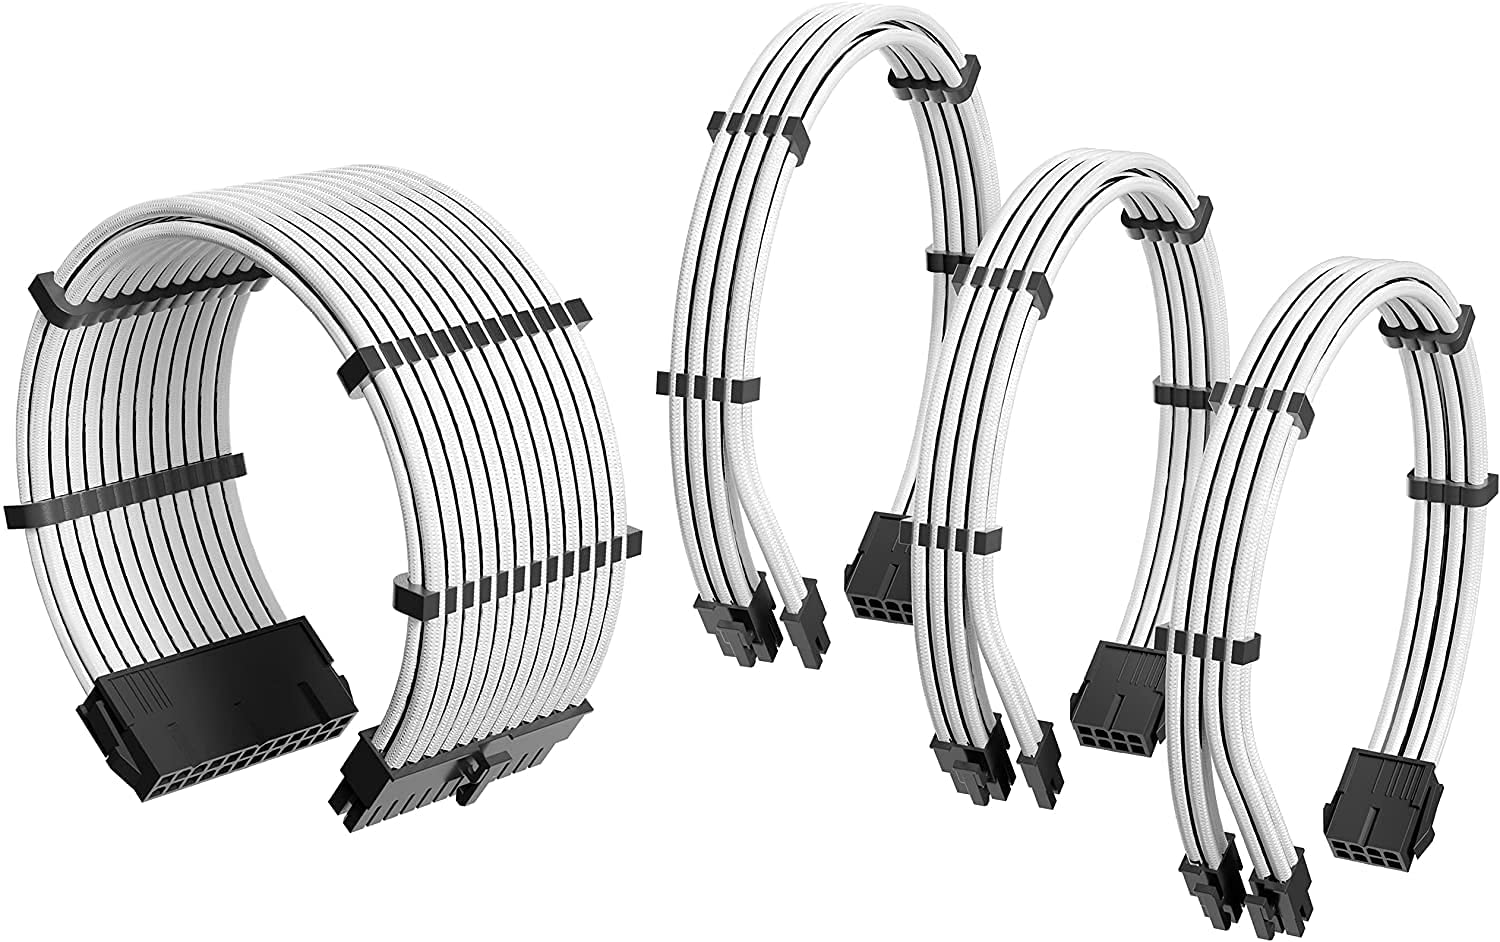 Antec Premium Sleeved Extension Cable Kit (4色)